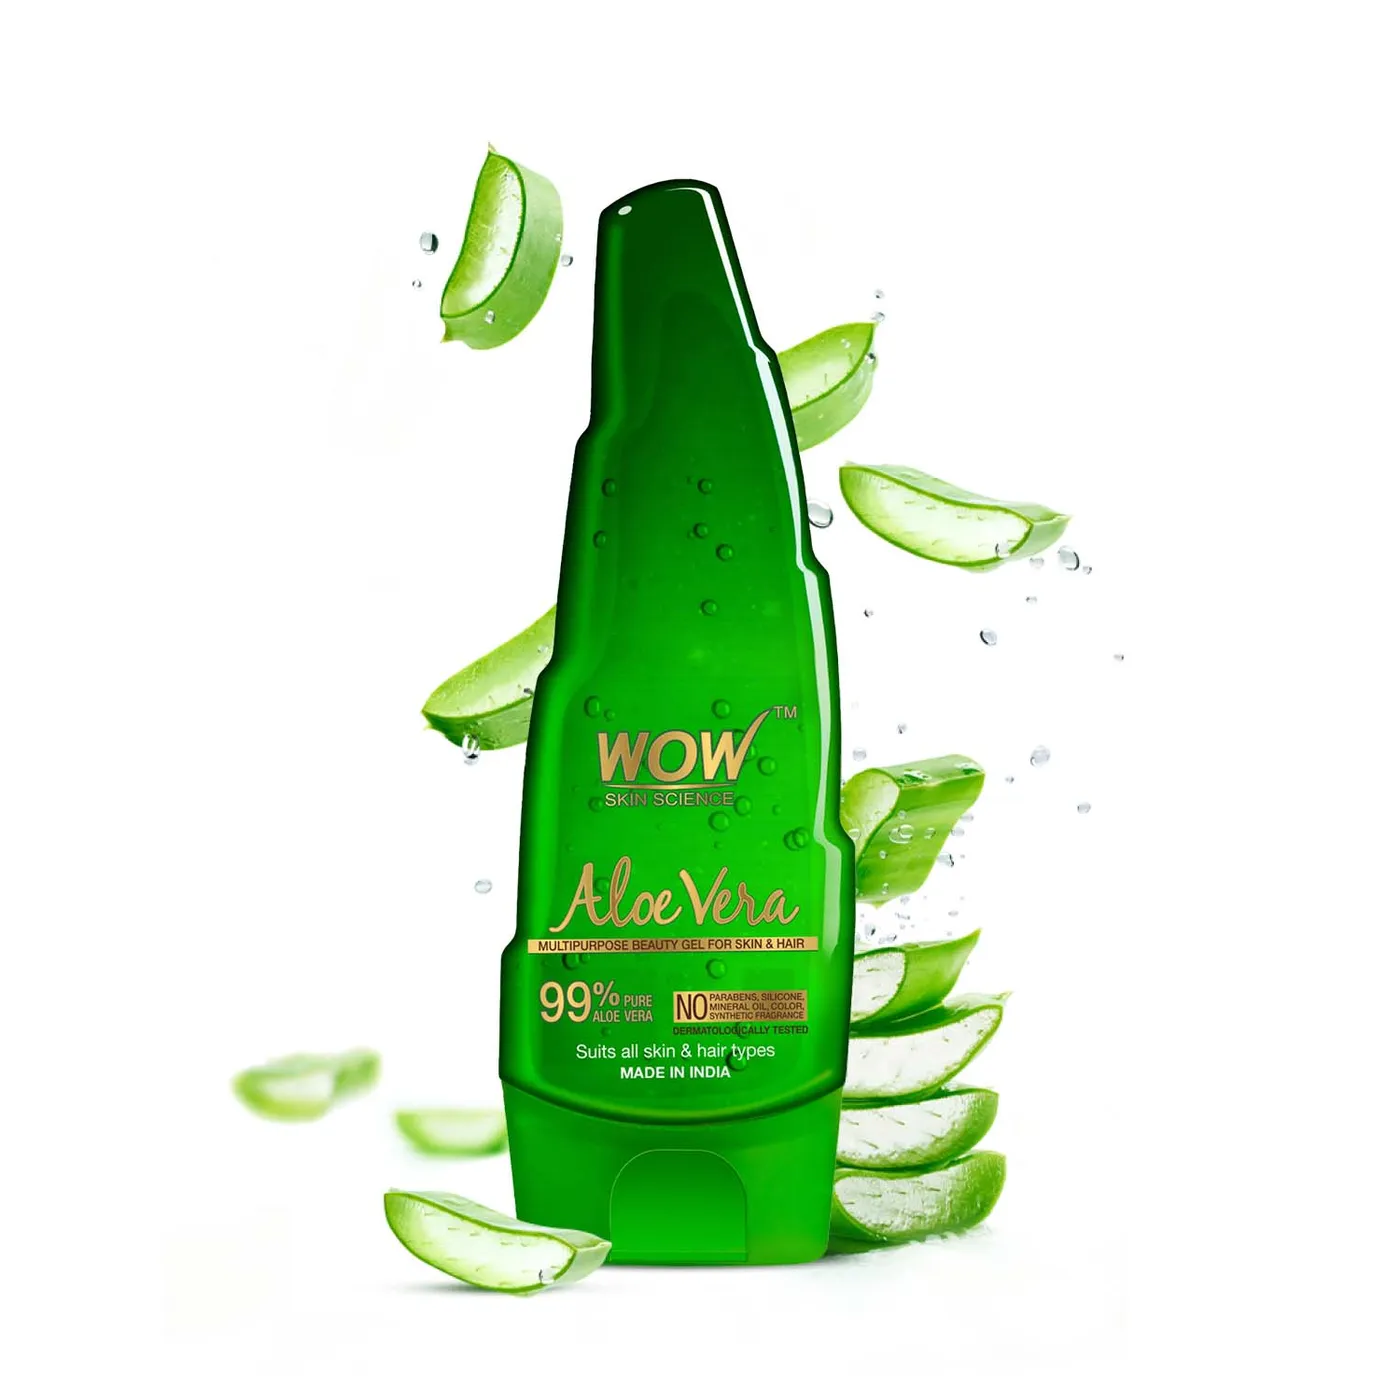 How To Use Aloe Vera Gel? Benefits & How to Apply